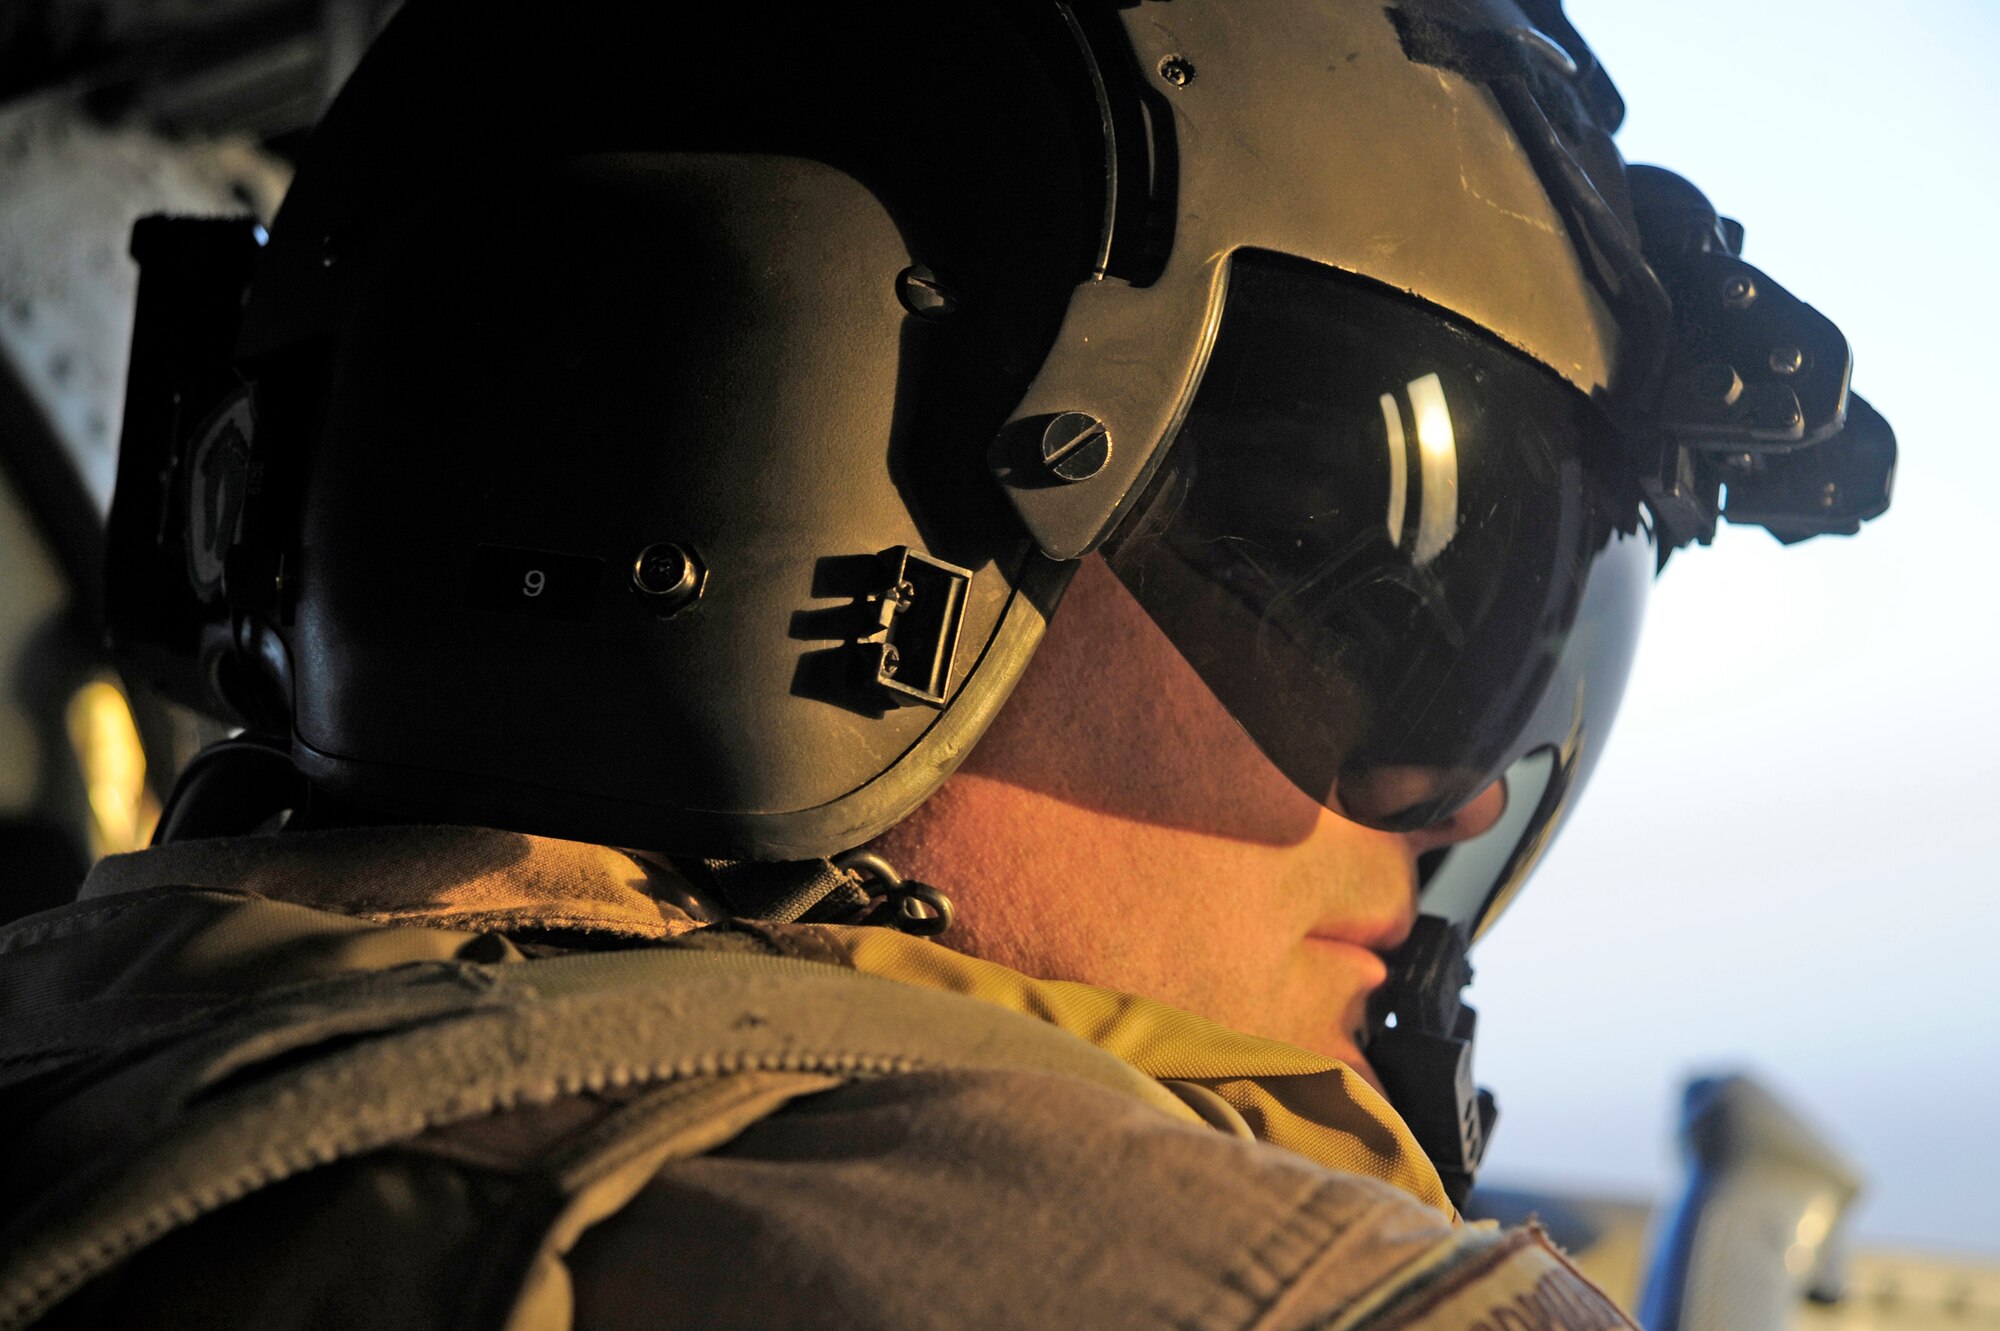 Tech. Sgt. Brock Woodward provides security during combat operations June 23 above the Hemland Province, Afghanistan. Sergeant Woodward is a flight engineer with the 129th Expeditionary Rescue Squadron. (U.S. Air Force photo/Staff Sgt. Shawn Weismiller) 